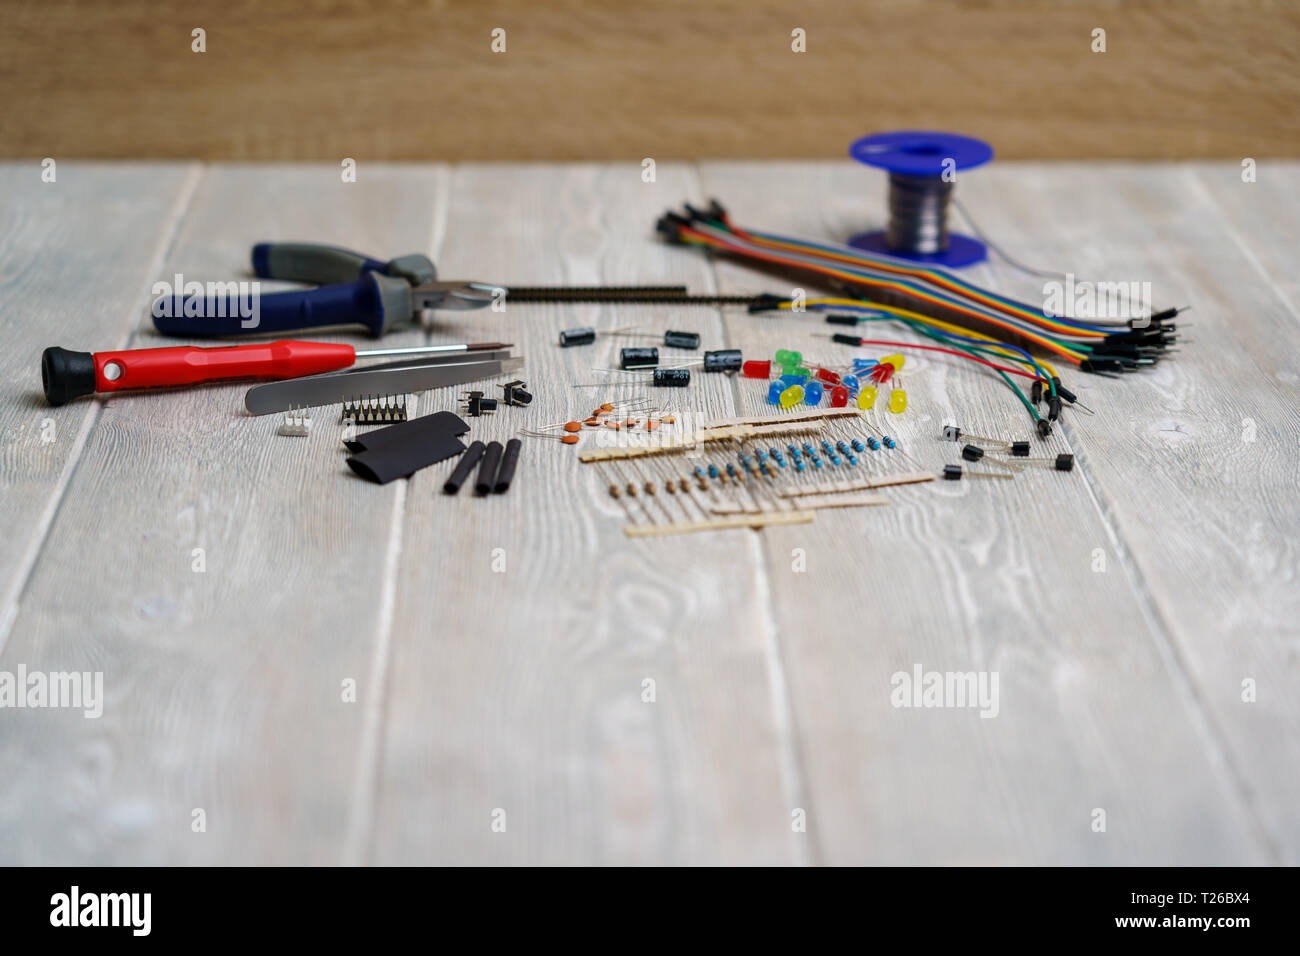 leds, resistors and electronic components with tools on a white vintage background Stock Photo